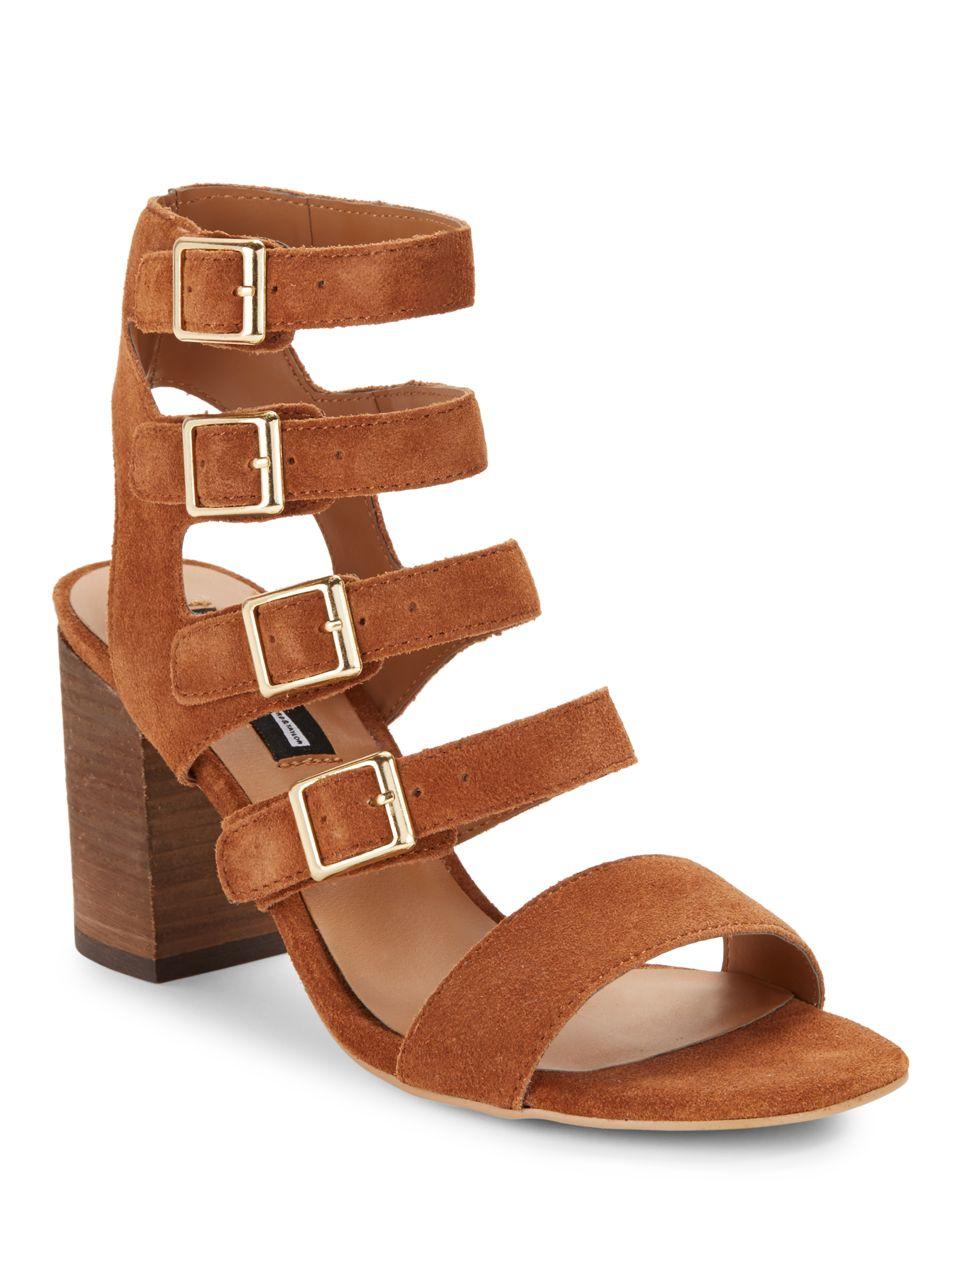 Lord & taylor Strappy High-heel Suede Sandals in Brown | Lyst